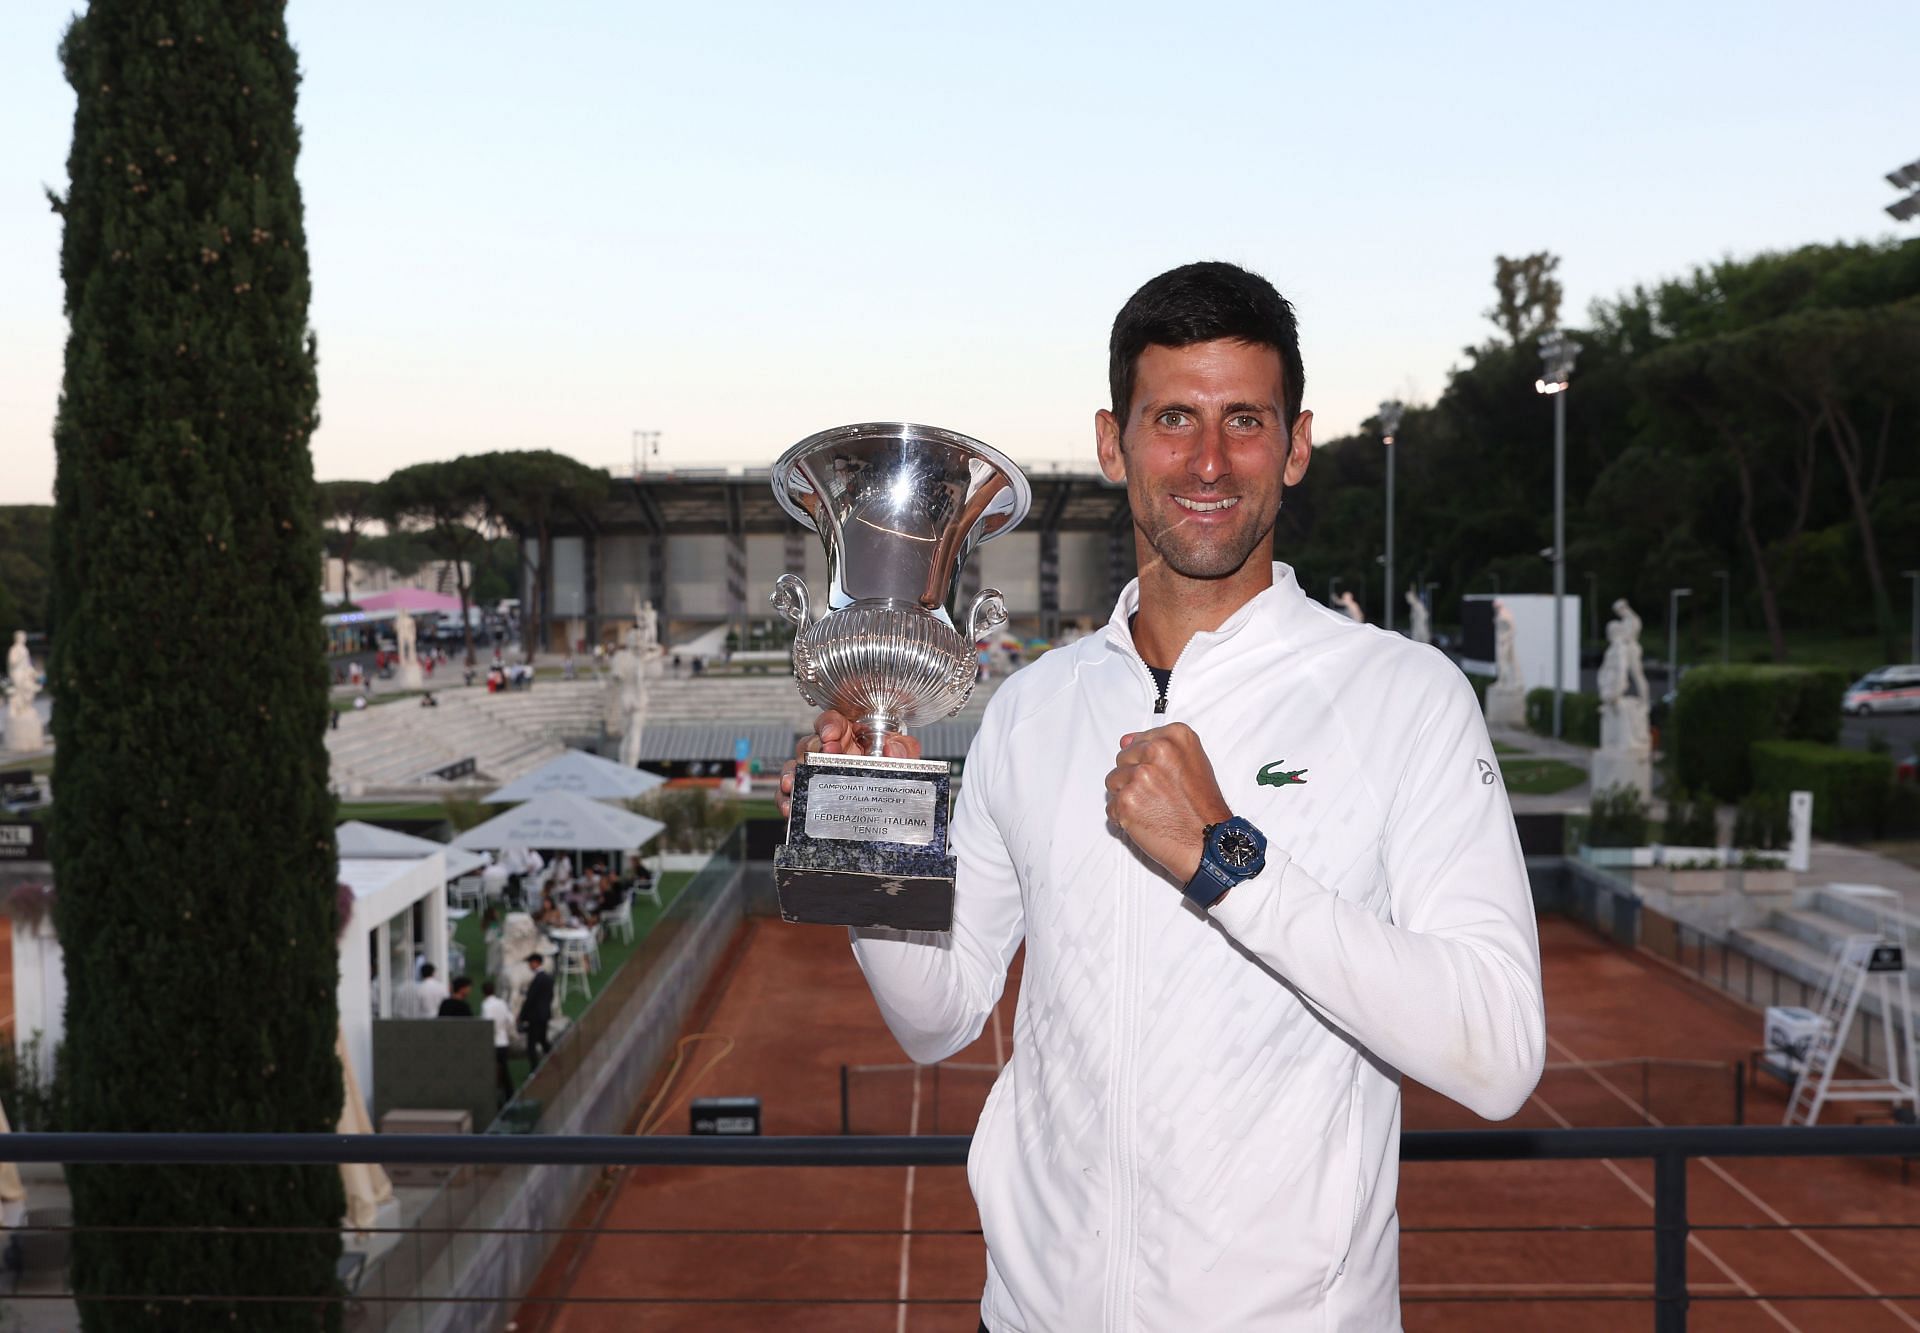 Djokovic congratulated the Spaniard during the French Open